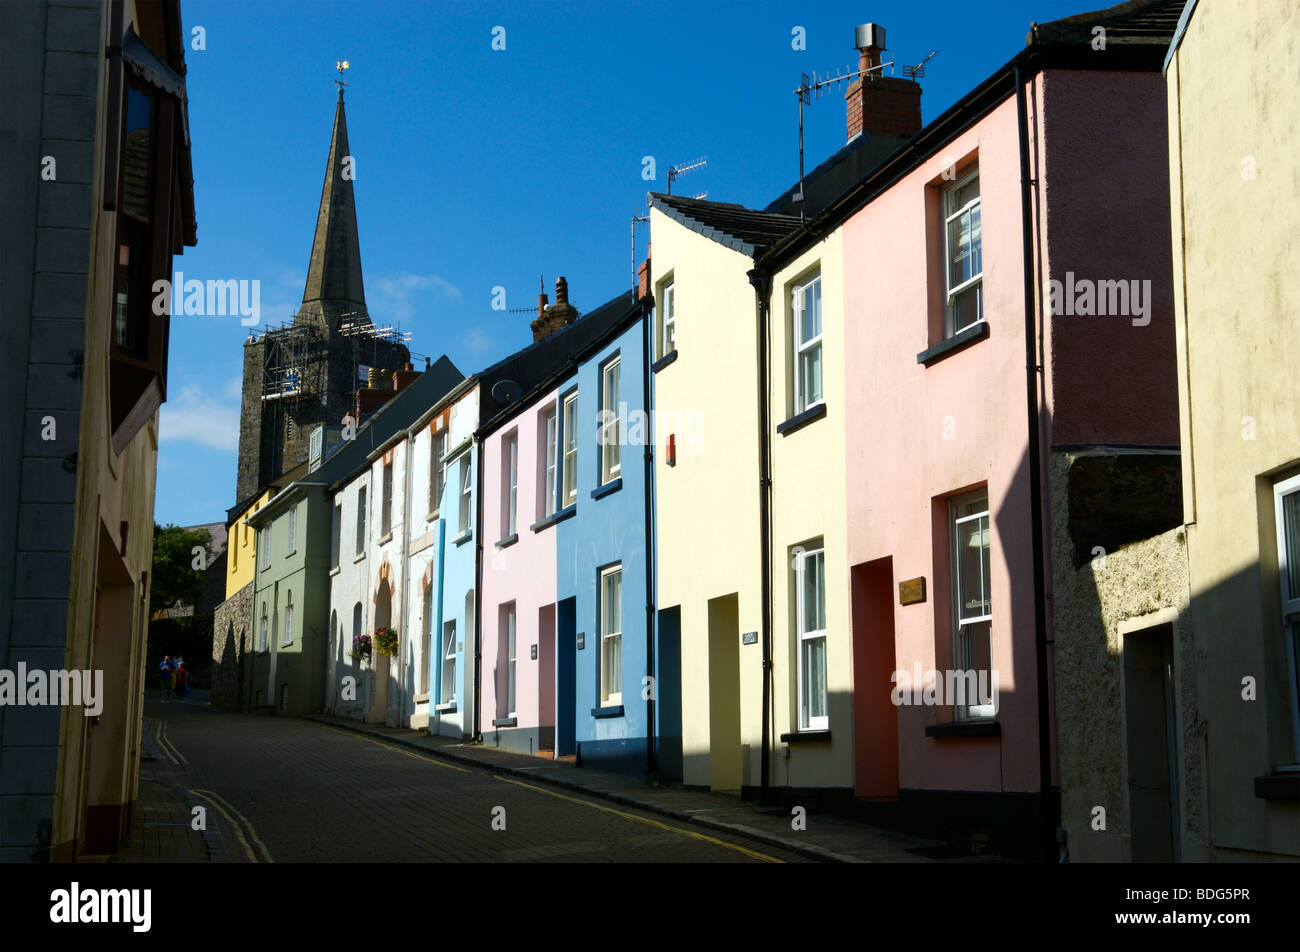 A row of colourful houses in Tenby, Pembrokeshire, Wales. Stock Photo